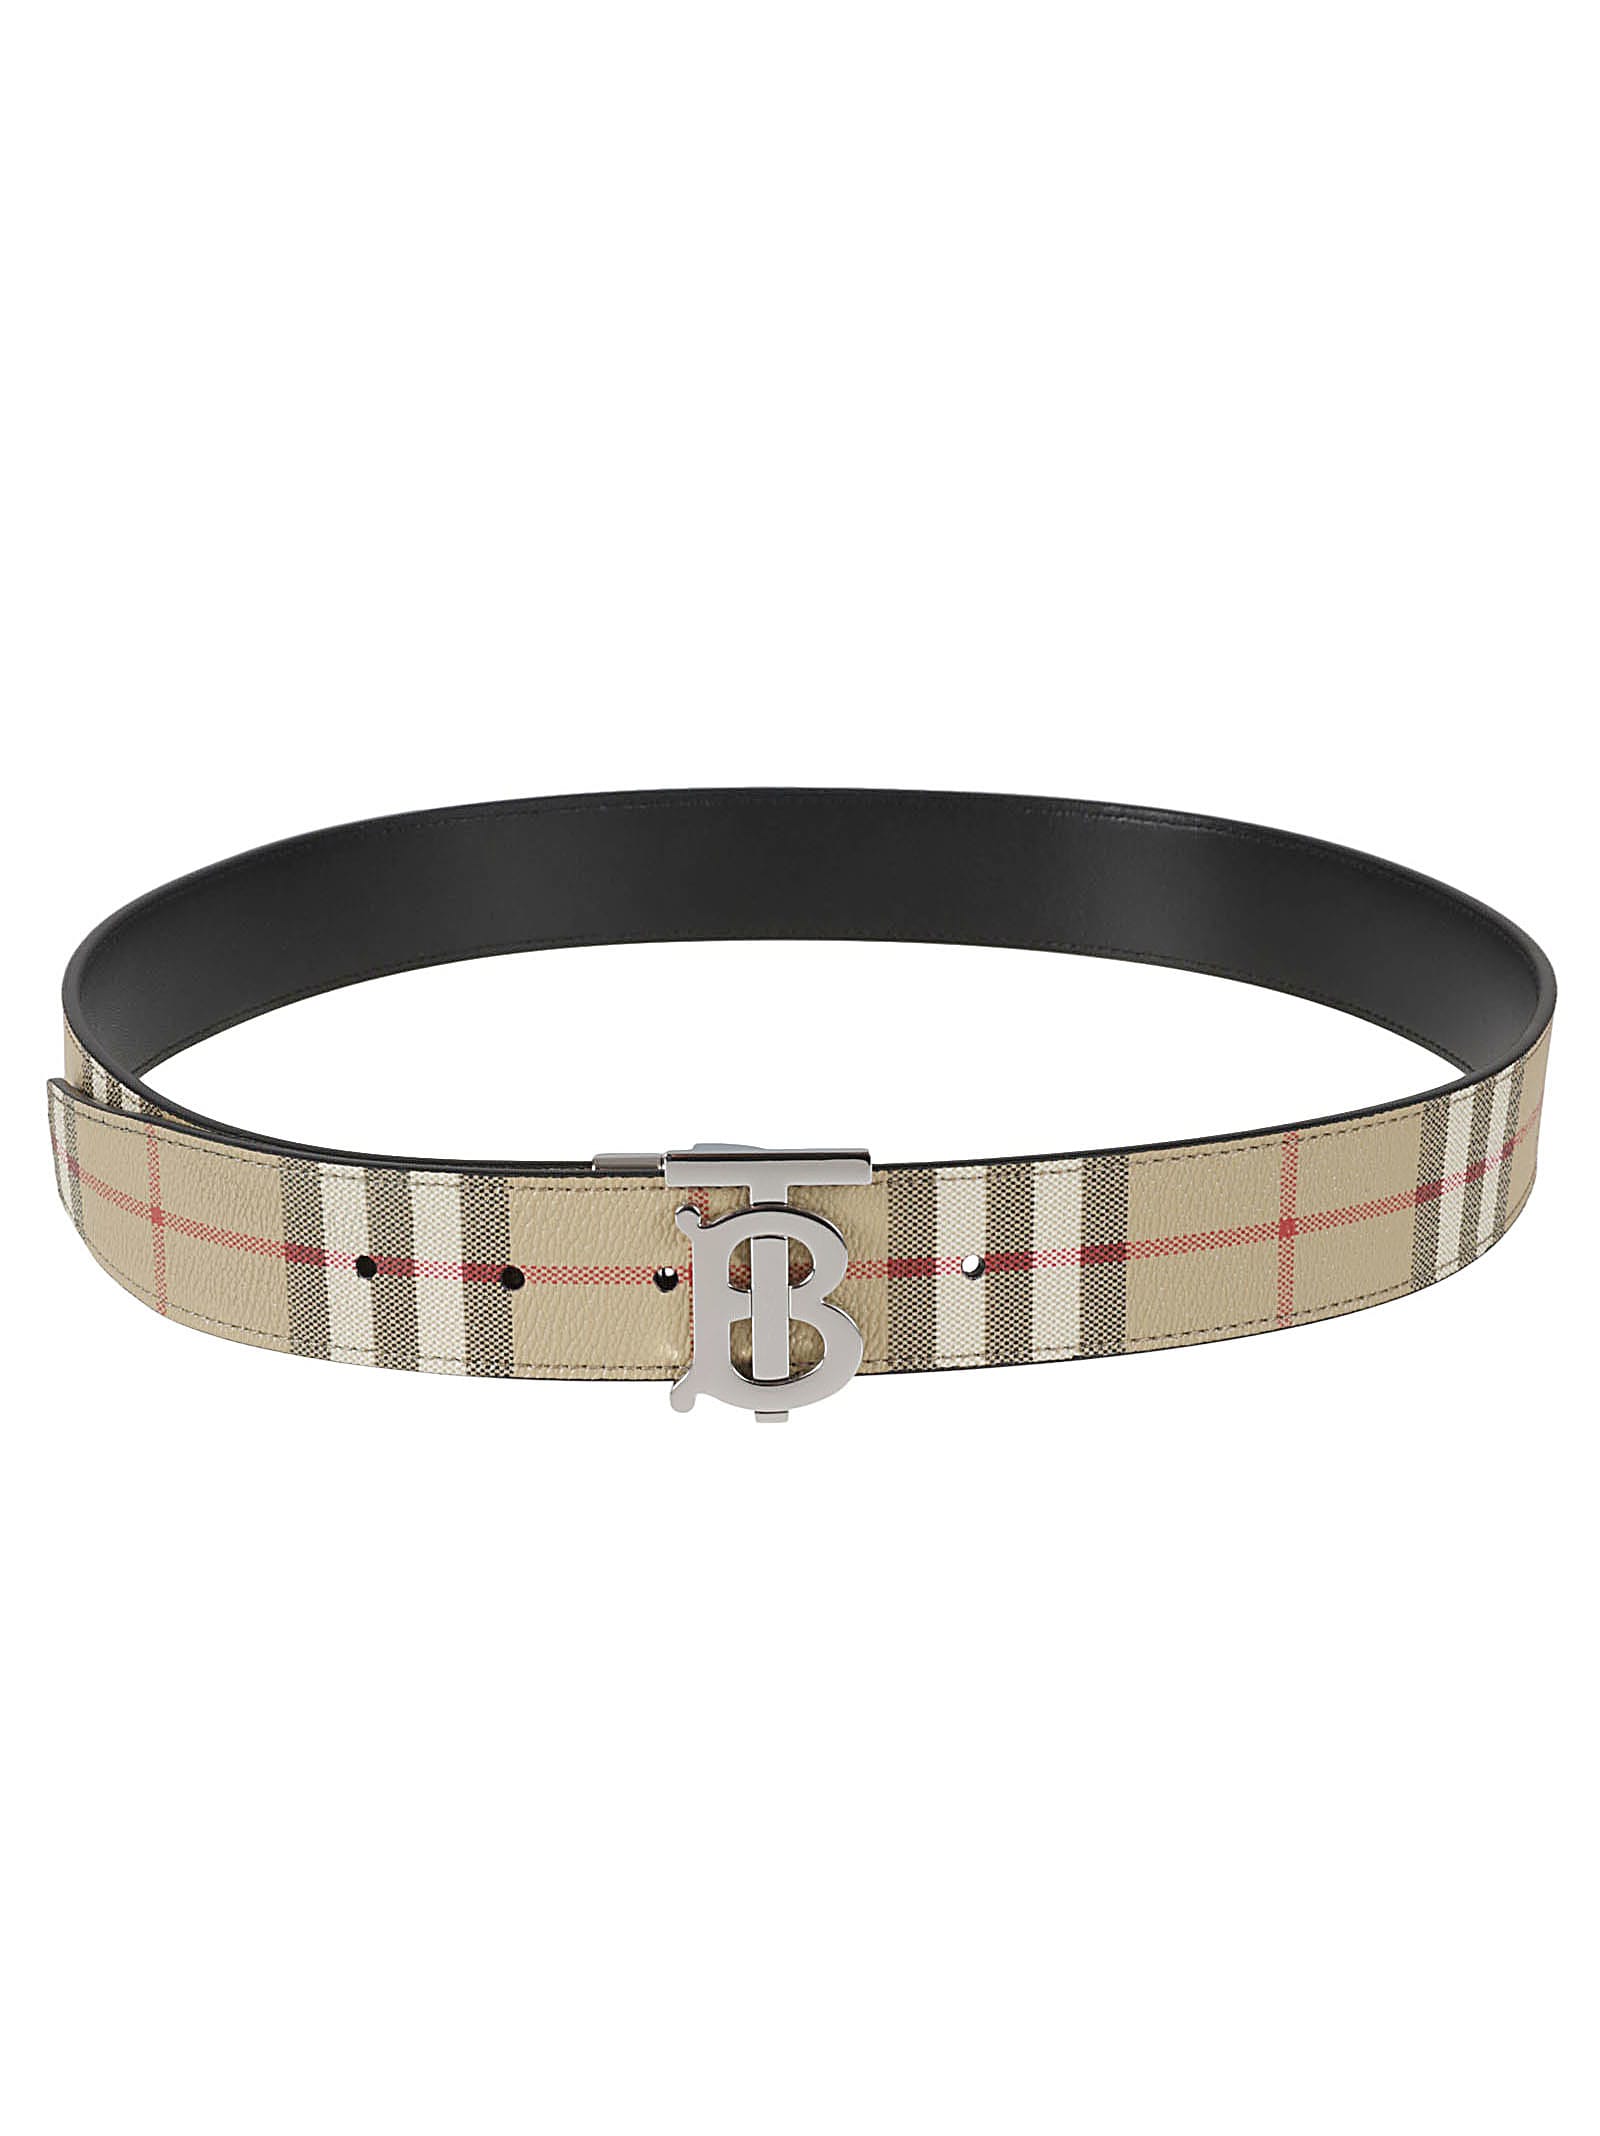 BURBERRY TB BUCKLED CHECK BELT